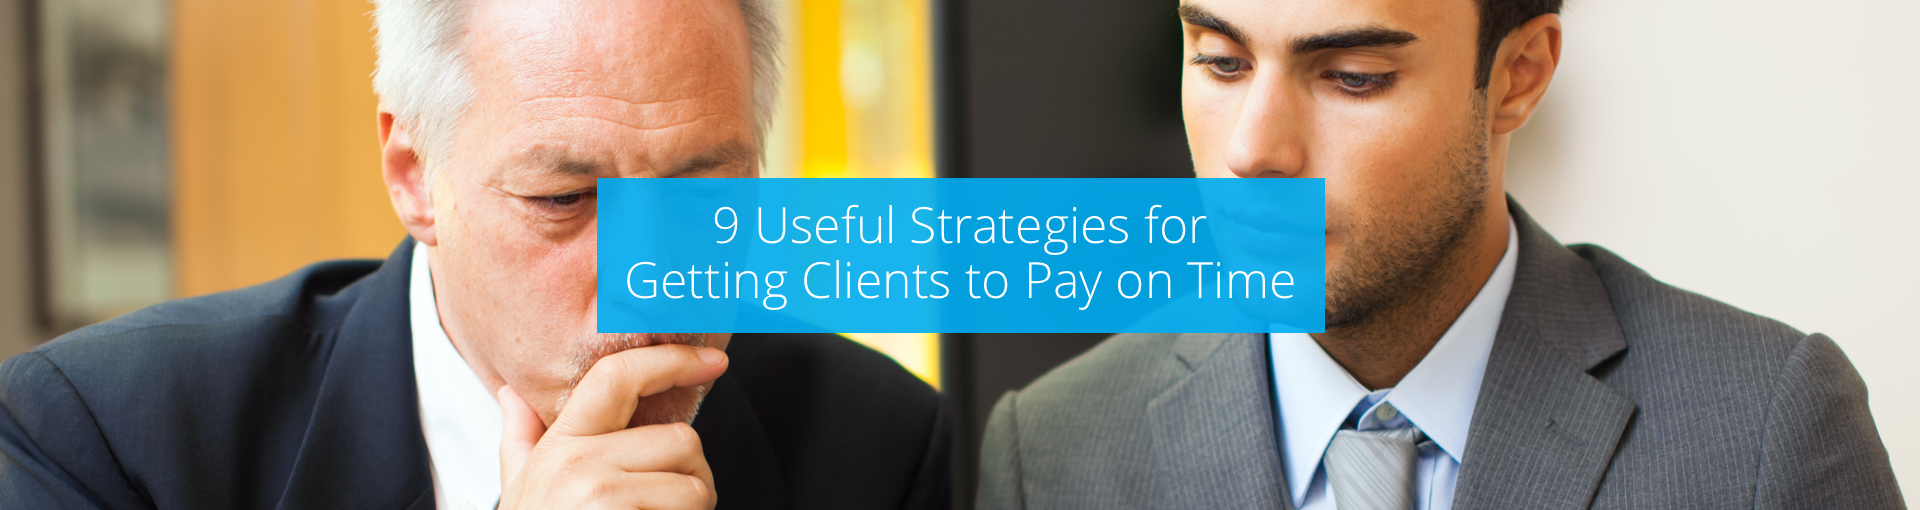 9 Useful Strategies for Getting Clients to Pay on Time Featured Image